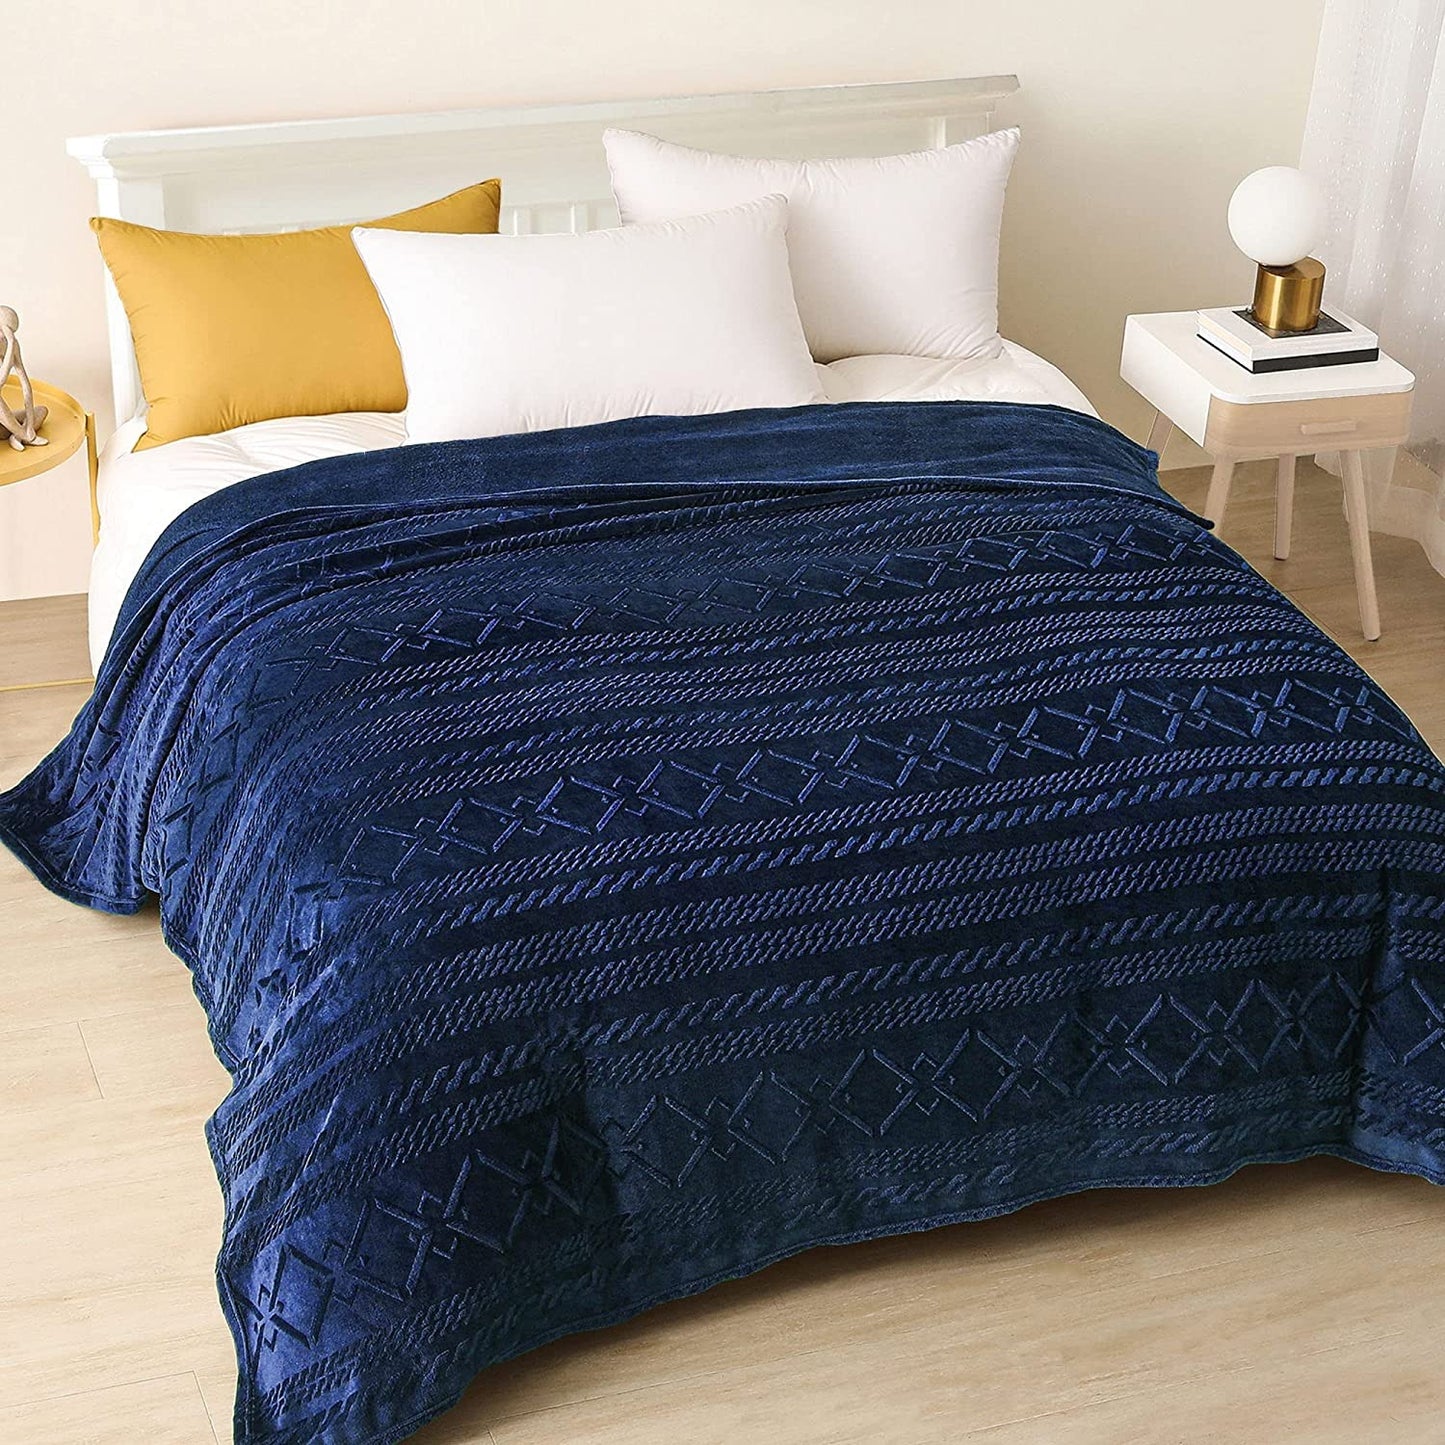 Exclusivo Mezcla Queen Size Soft Bed Blanket, Warm Fuzzy Luxury Bed Blankets, Decorative Geometry Pattern Plush Throw Blanket for Bed, 90x90 Inches, Navy Blue